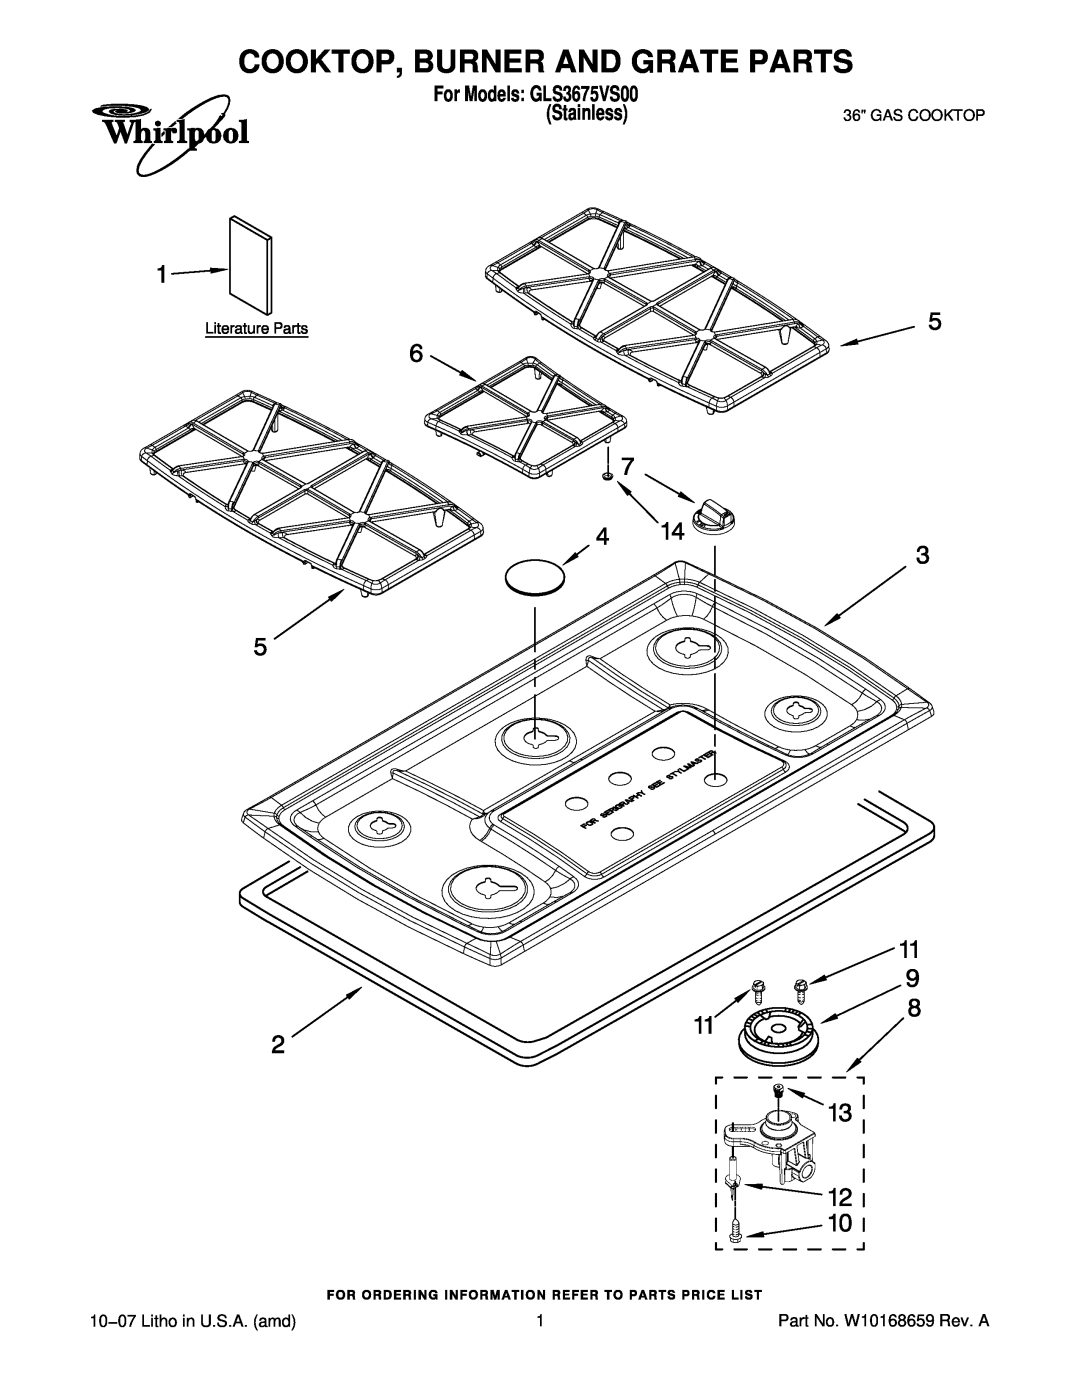 Whirlpool manual Cooktop, Burner And Grate Parts, 10−07 Litho in U.S.A. amd, For Models GLS3675VS00 Stainless 